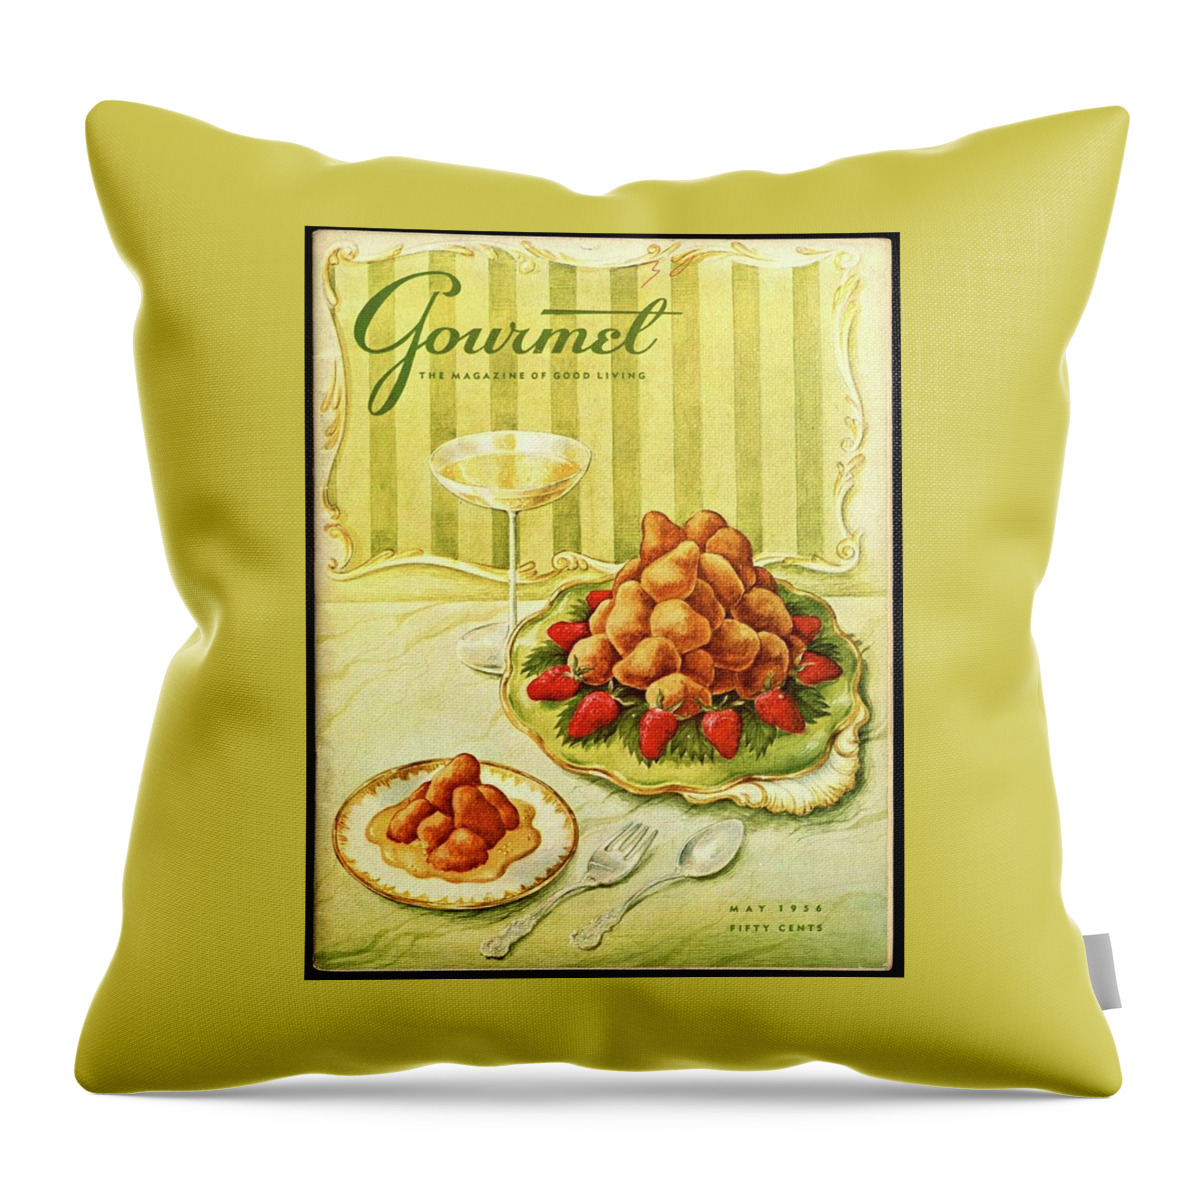 Gourmet Cover Featuring A Plate Of Beignets Throw Pillow